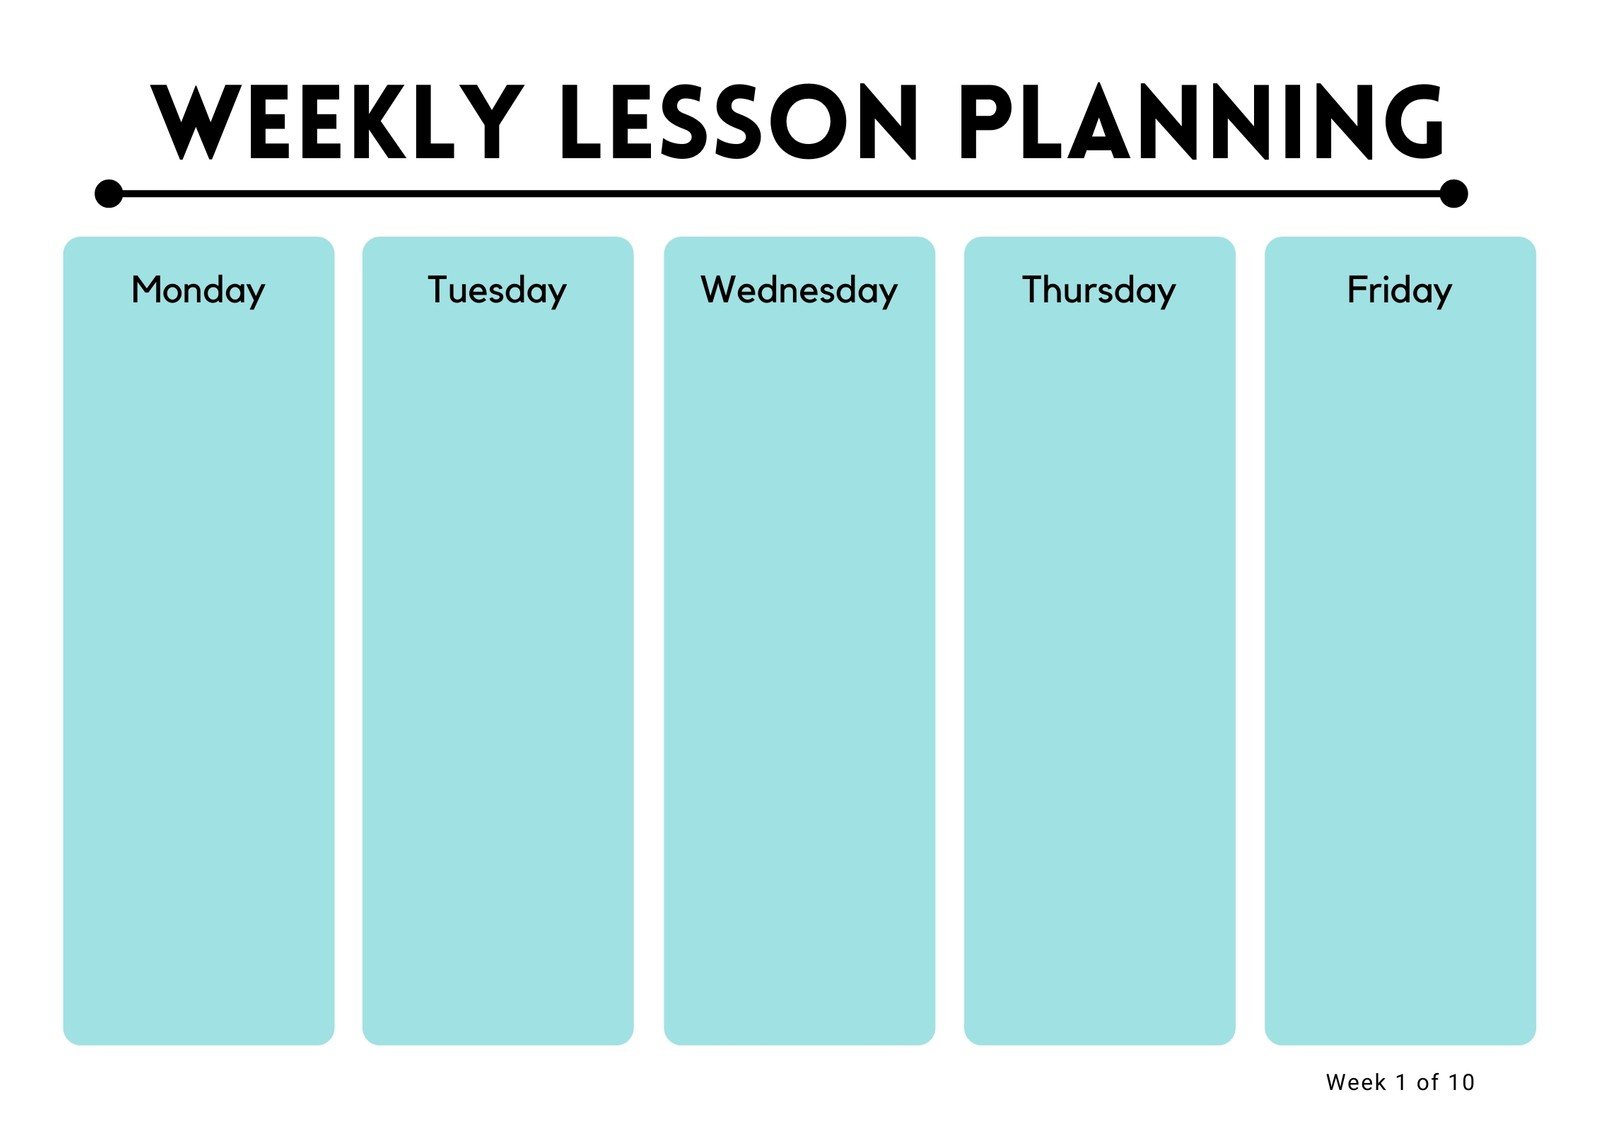 Blank weekly lesson plan templates in blue-green color with Monday to Friday columns and a title with black bold font